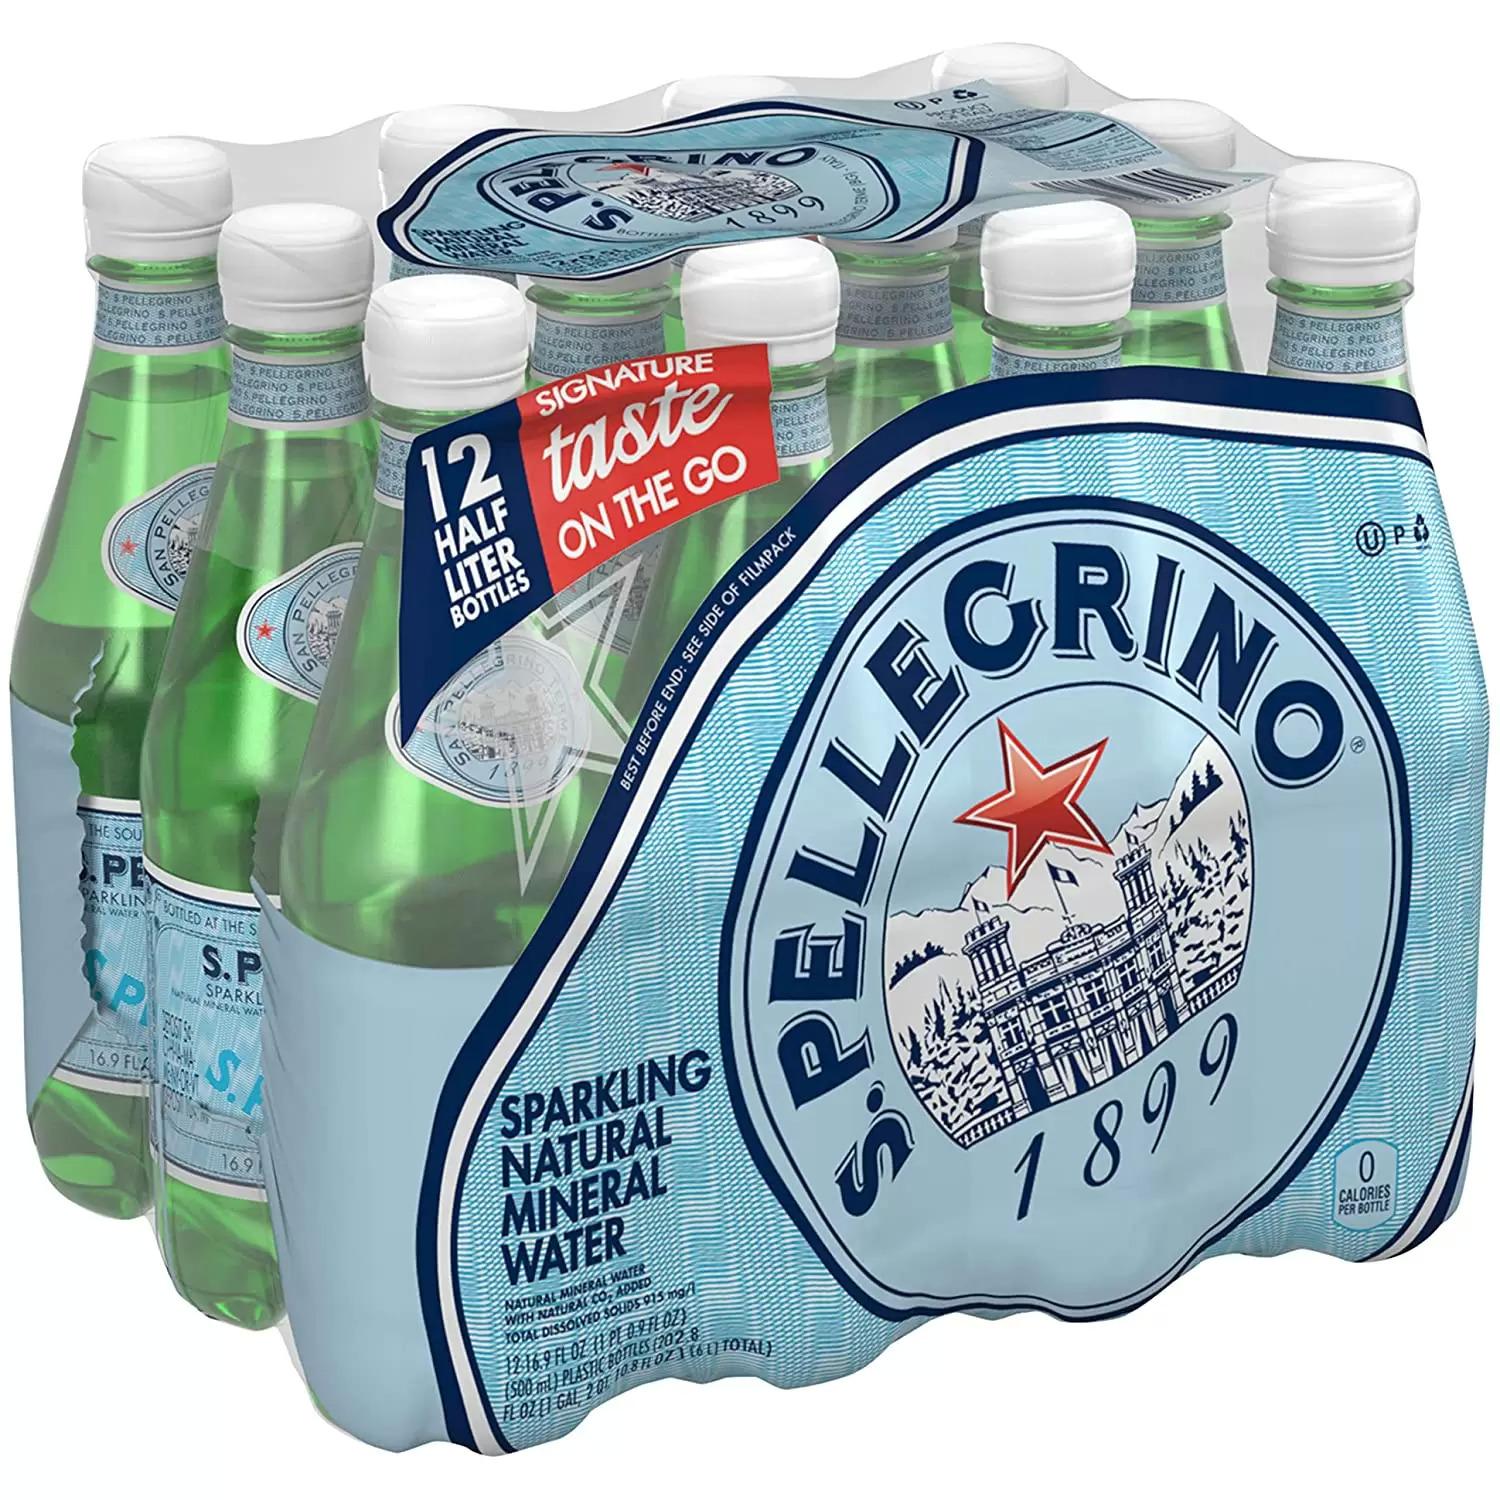 S Pellegrino Sparkling Natural Mineral Water 12 Pack for $9.83 Shipped